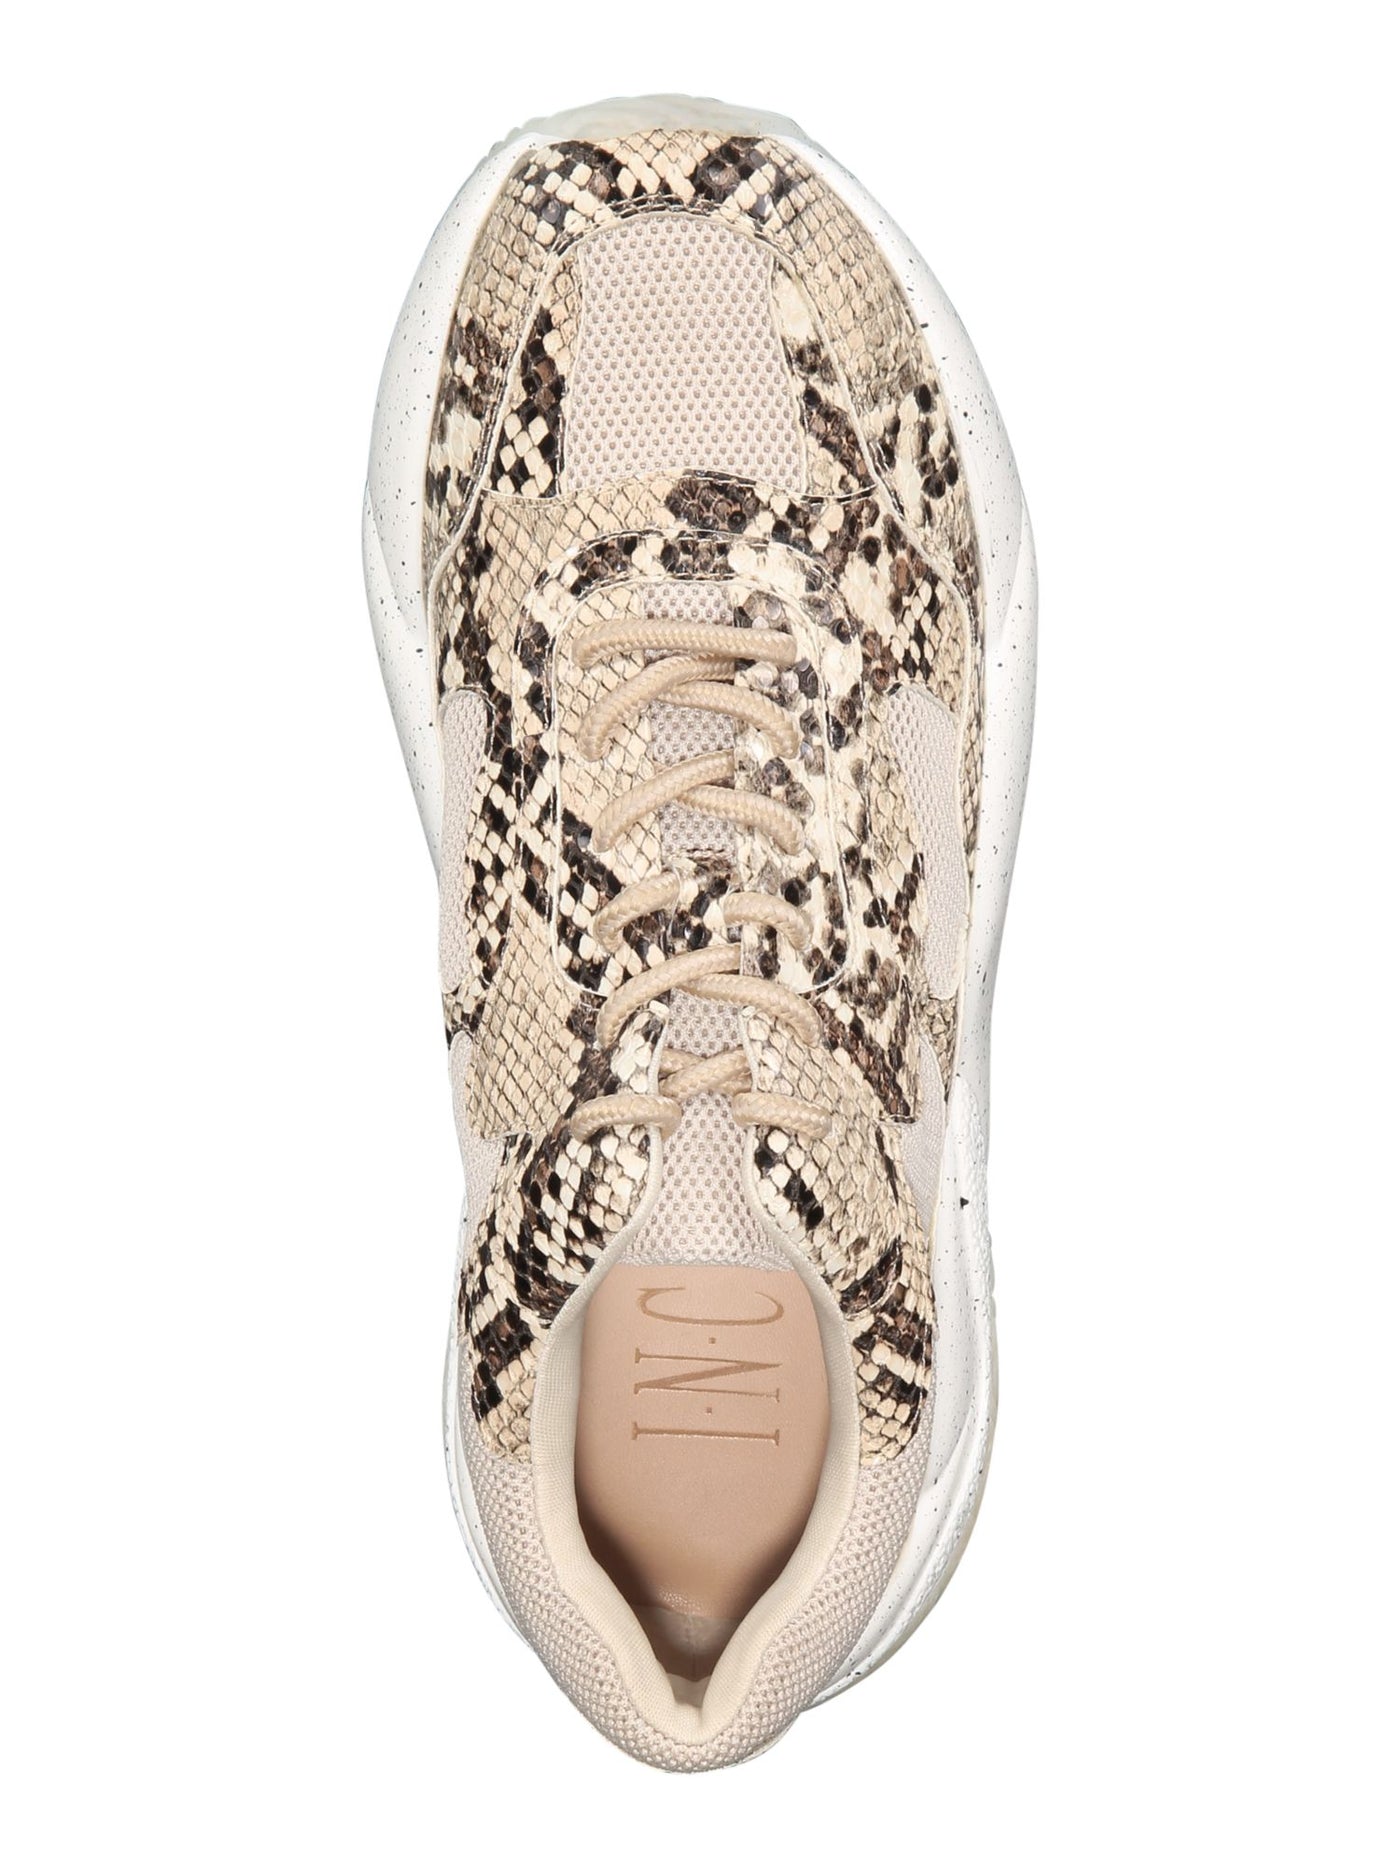 INC Womens Beige Snake Print Comfort Bubblez Round Toe Lace-Up Leather Athletic Training Shoes M